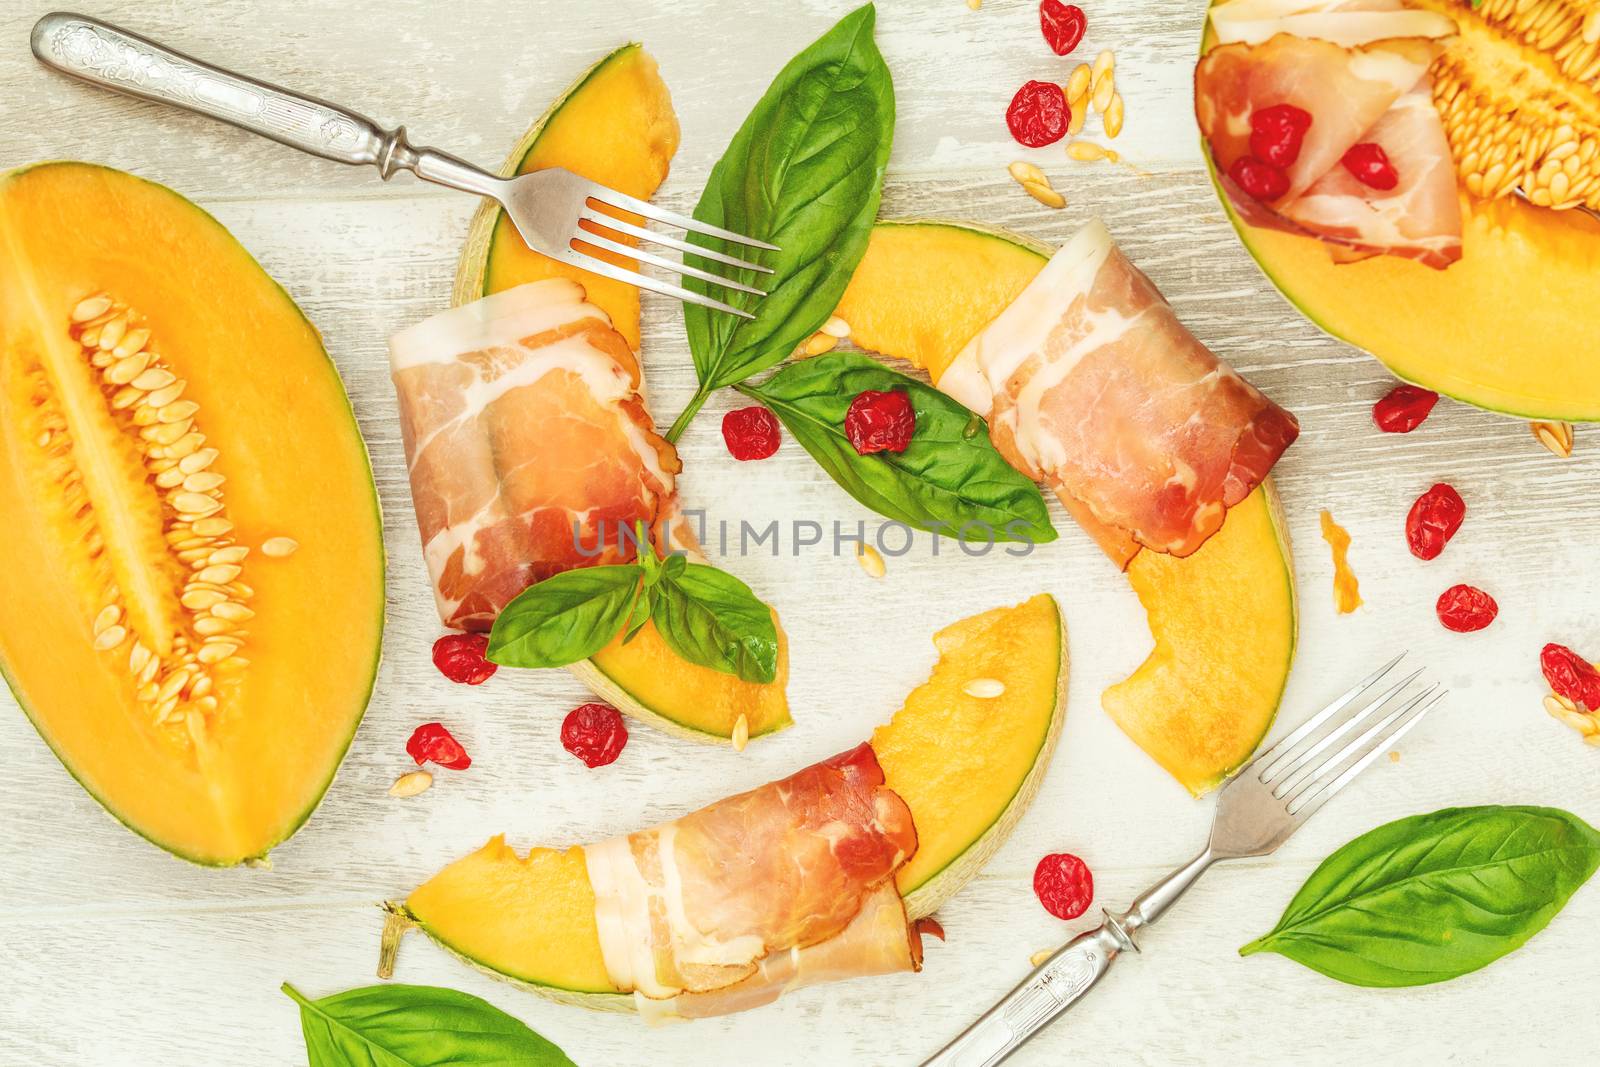 Cantaloupe melon sliced with Prosciutto jamon, basil leaves, fig and dried cherry. Italian appetizer on wooden background